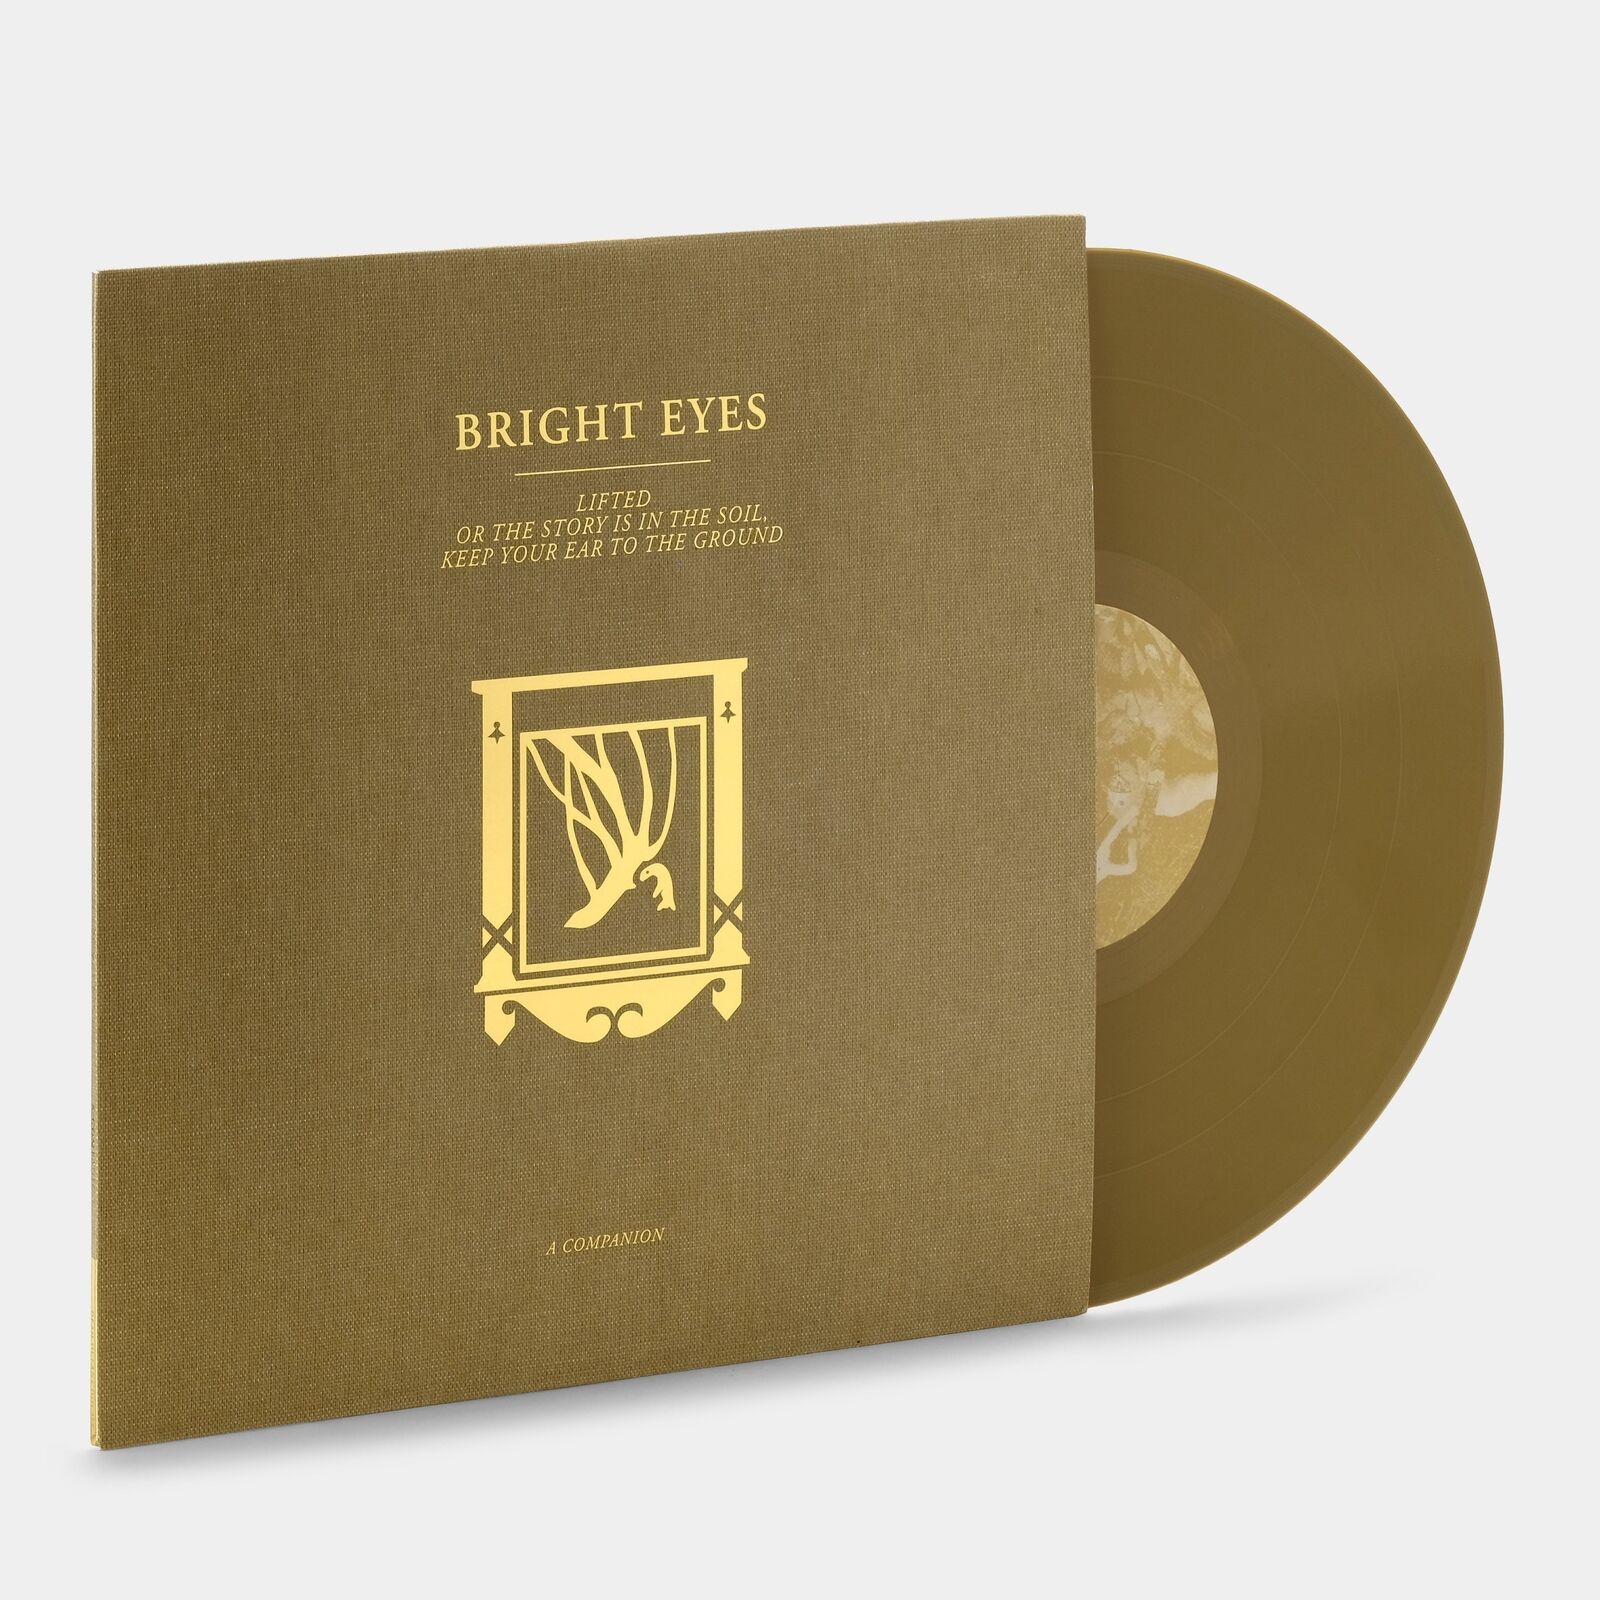 Bright Eyes - Lifted Or The Story Is In The Soil, Keep Your Ear To The Ground (A